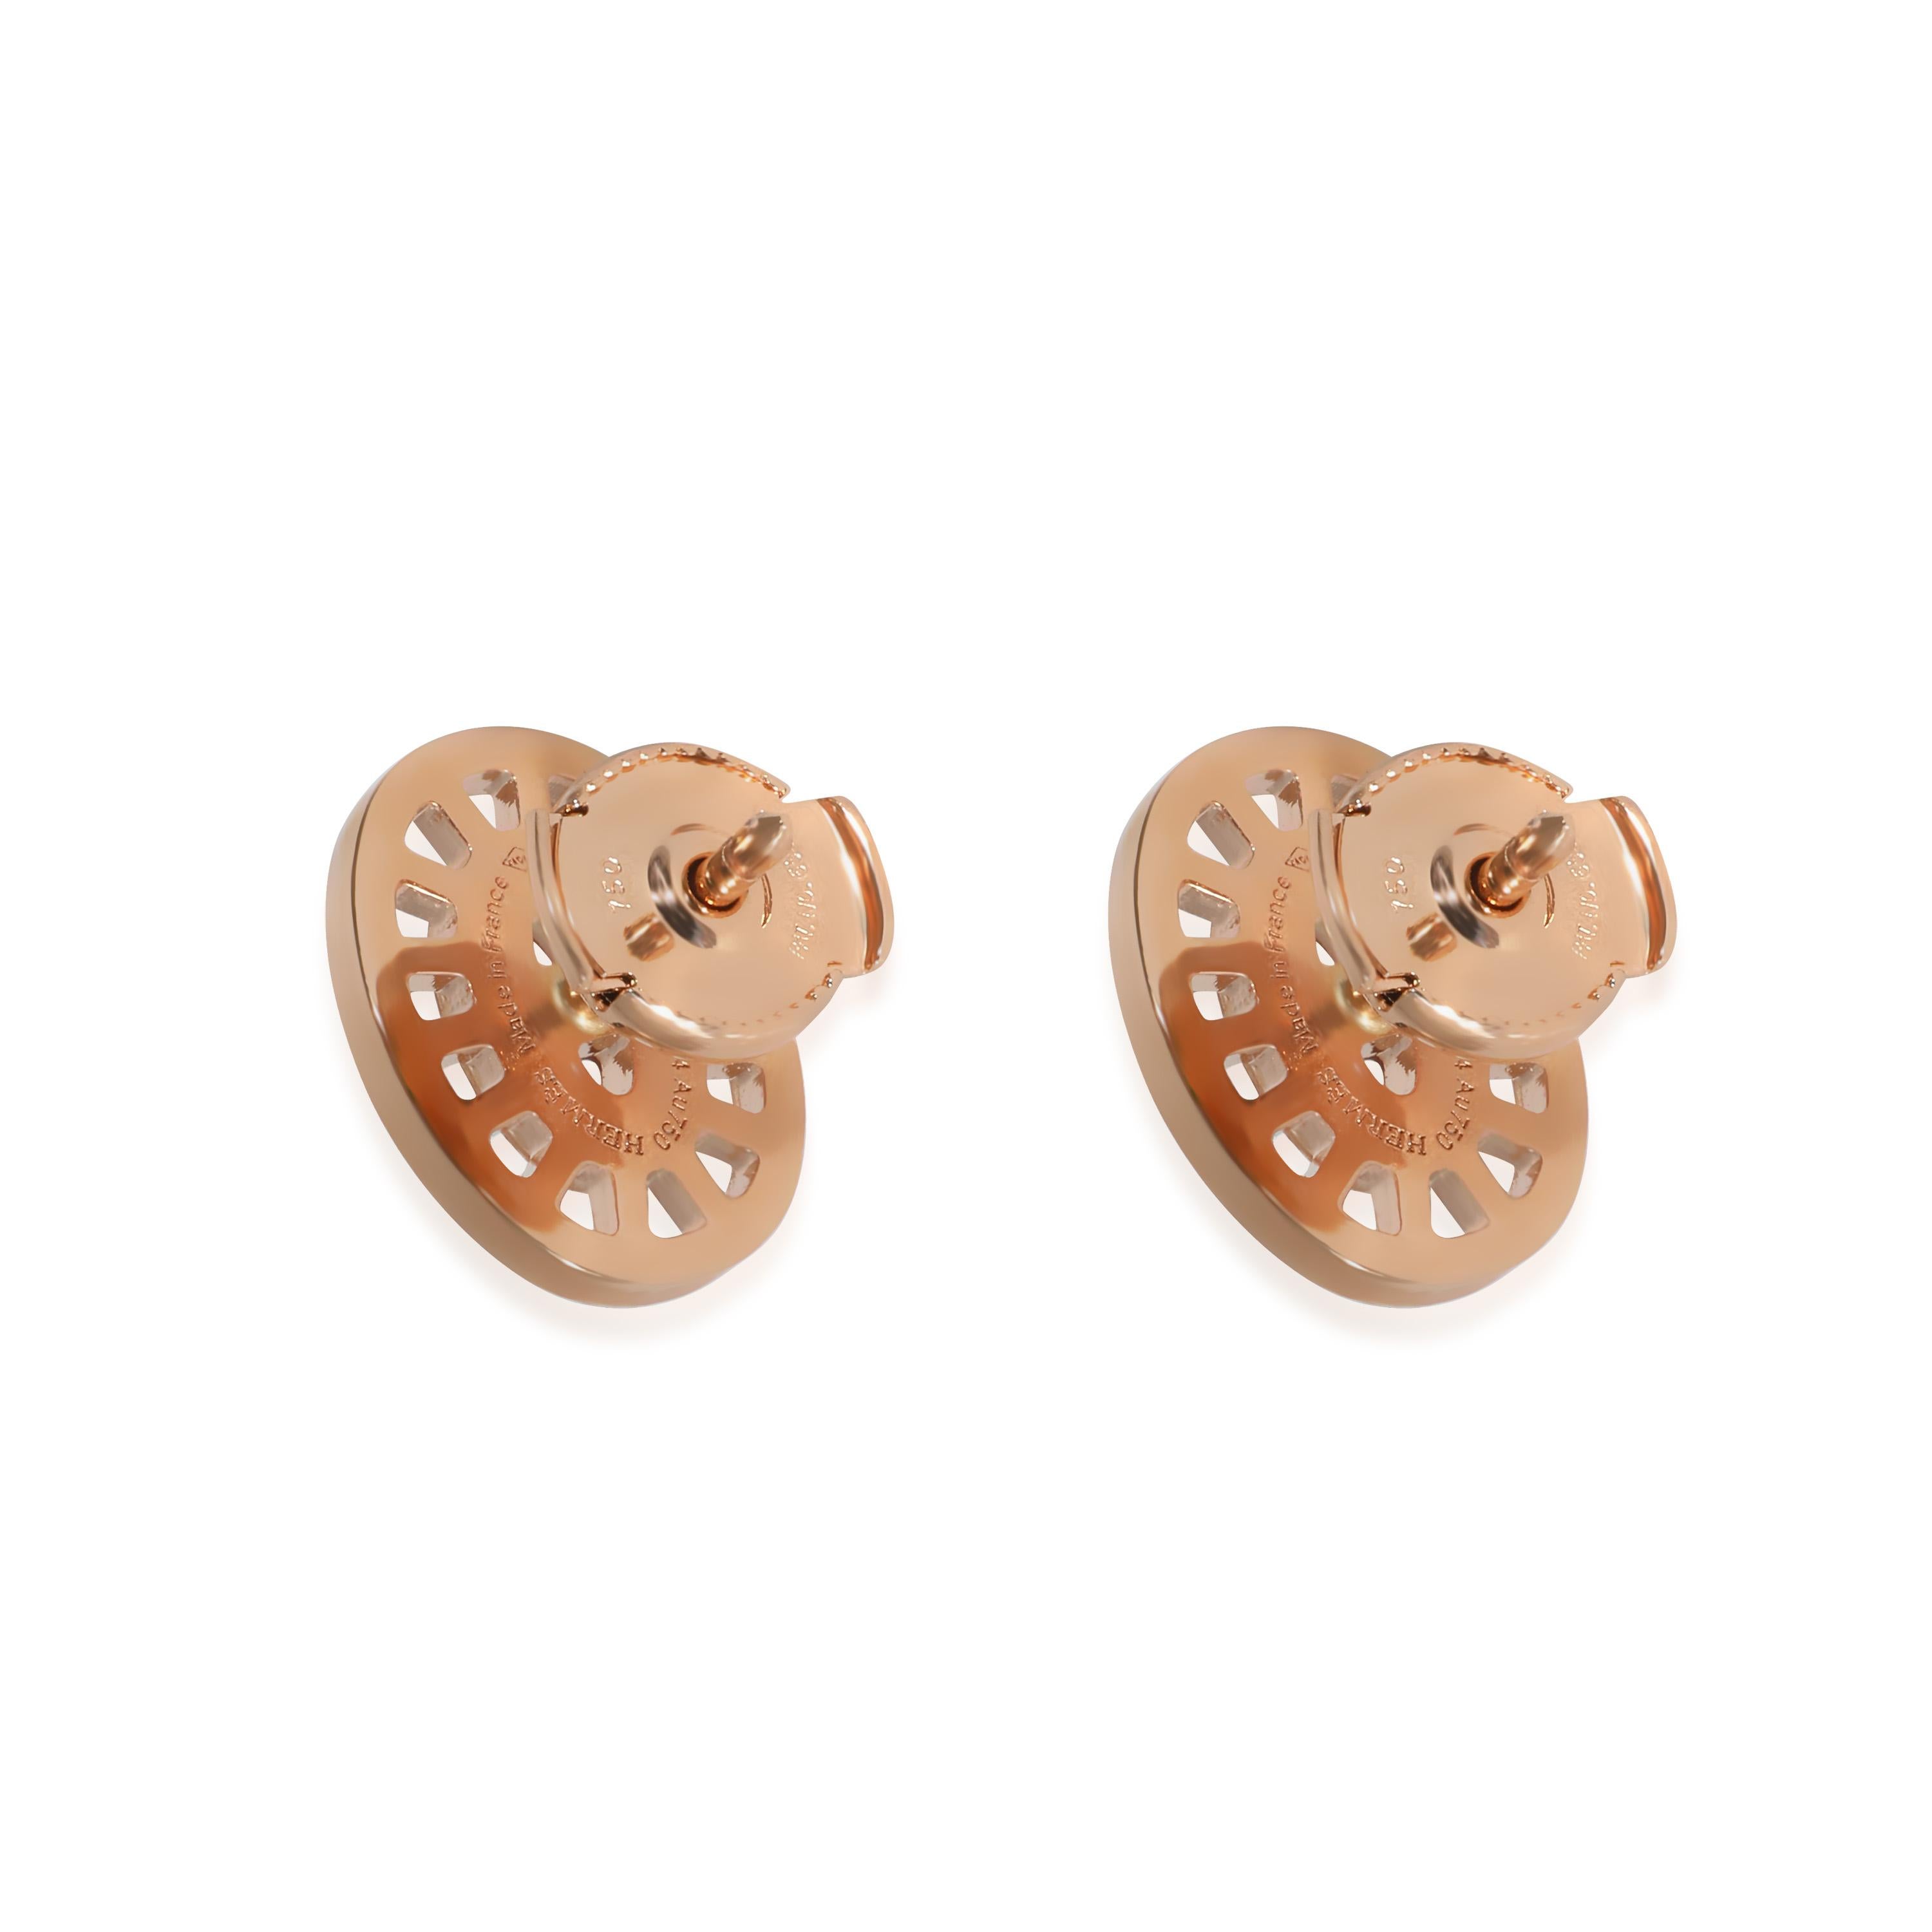 Hermès Chaine d'ancre Earrings in 18k Rose Gold 0.13 CTW

PRIMARY DETAILS
SKU: 135814
Listing Title: Hermès Chaine d'ancre Earrings in 18k Rose Gold 0.13 CTW
Condition Description: Retails for 4925 USD. In excellent condition. 13 mm in length. Comes